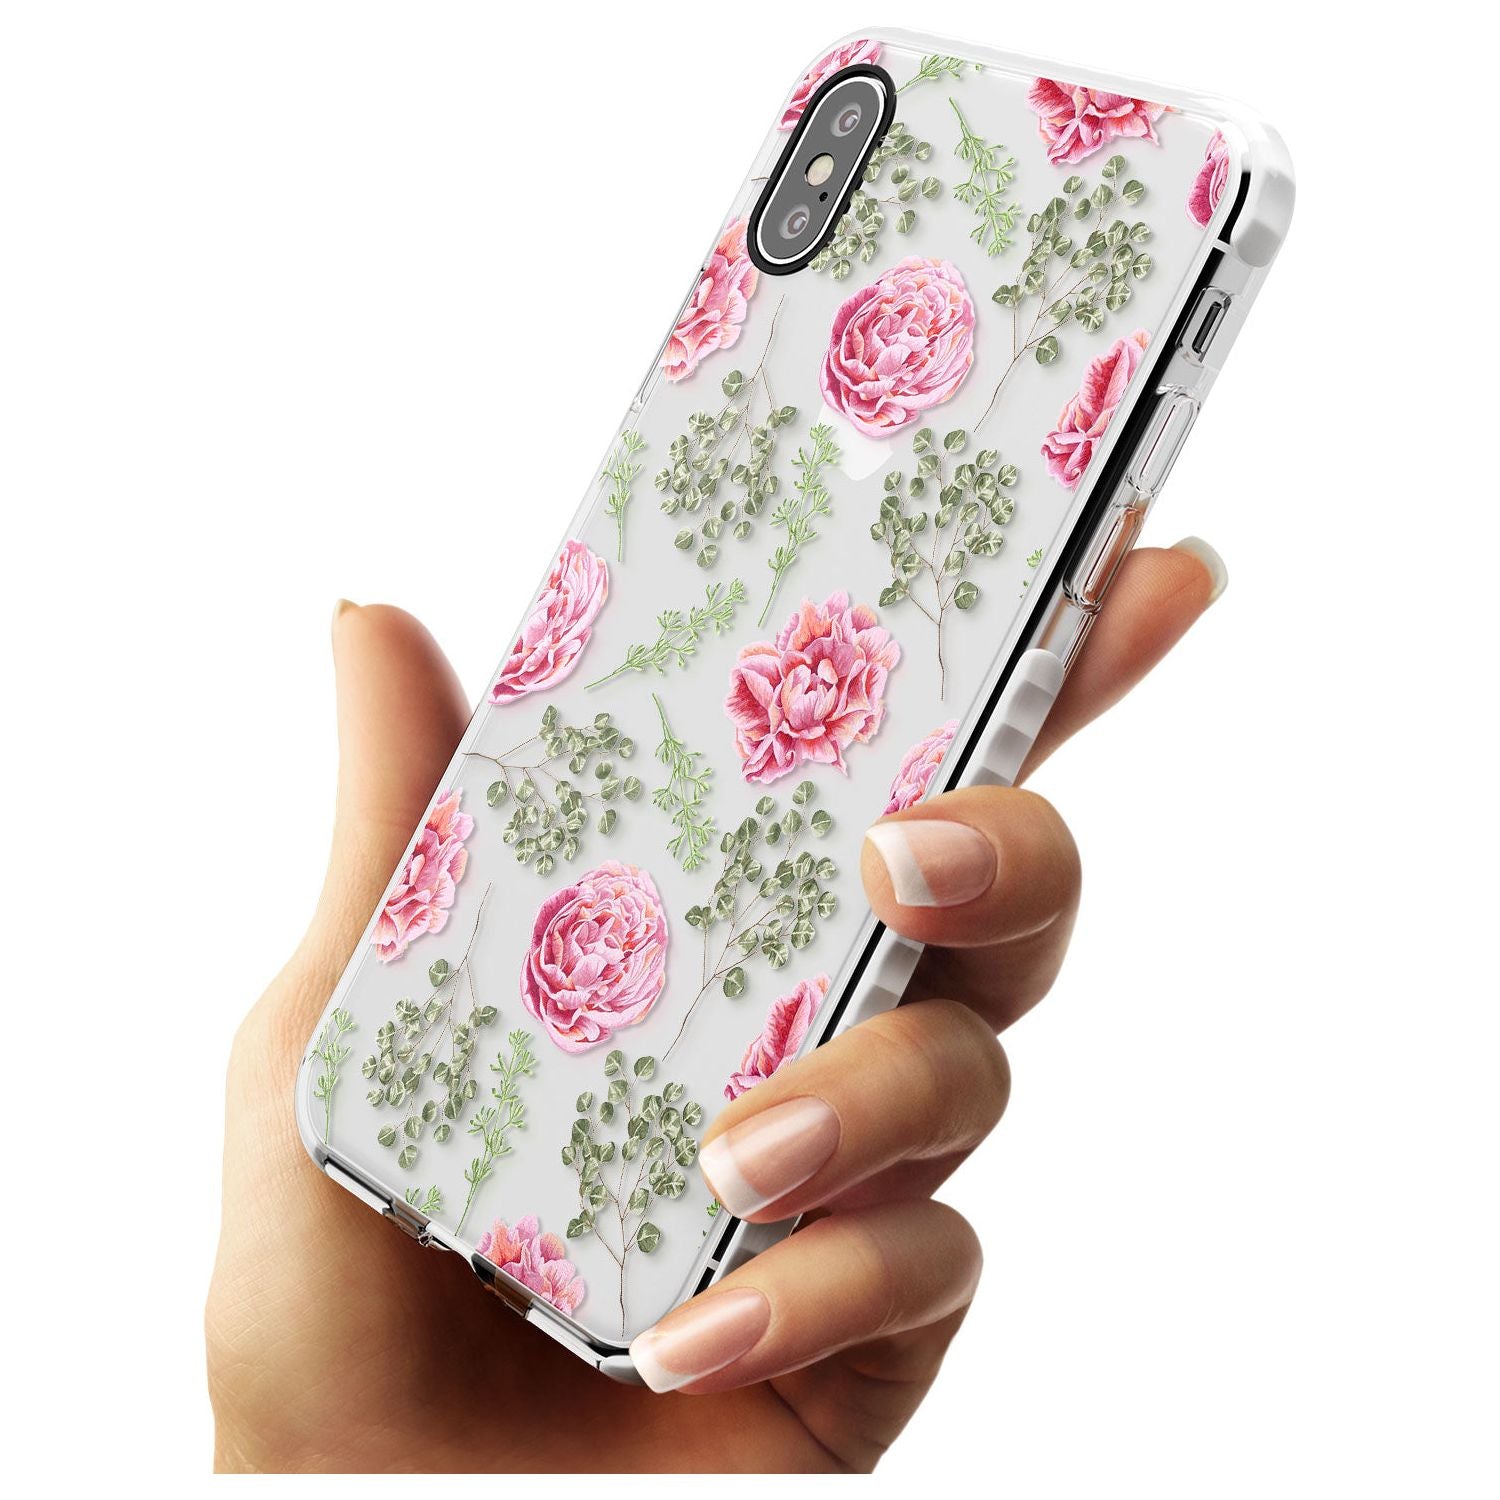 Roses & Eucalyptus Transparent Floral Impact Phone Case for iPhone X XS Max XR